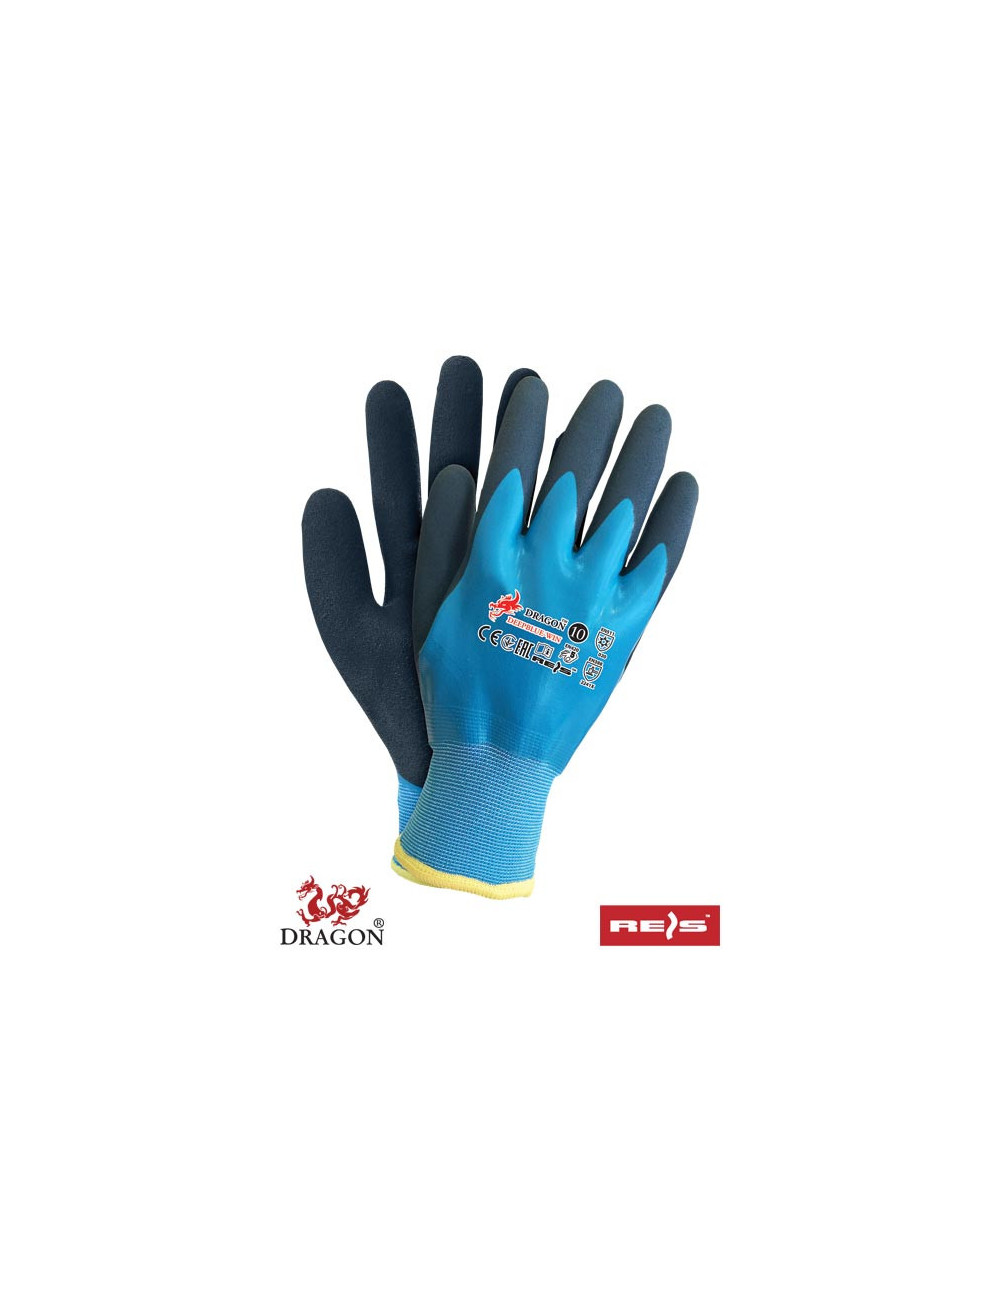 Protective gloves deepblue-win ng blue-navy Reis